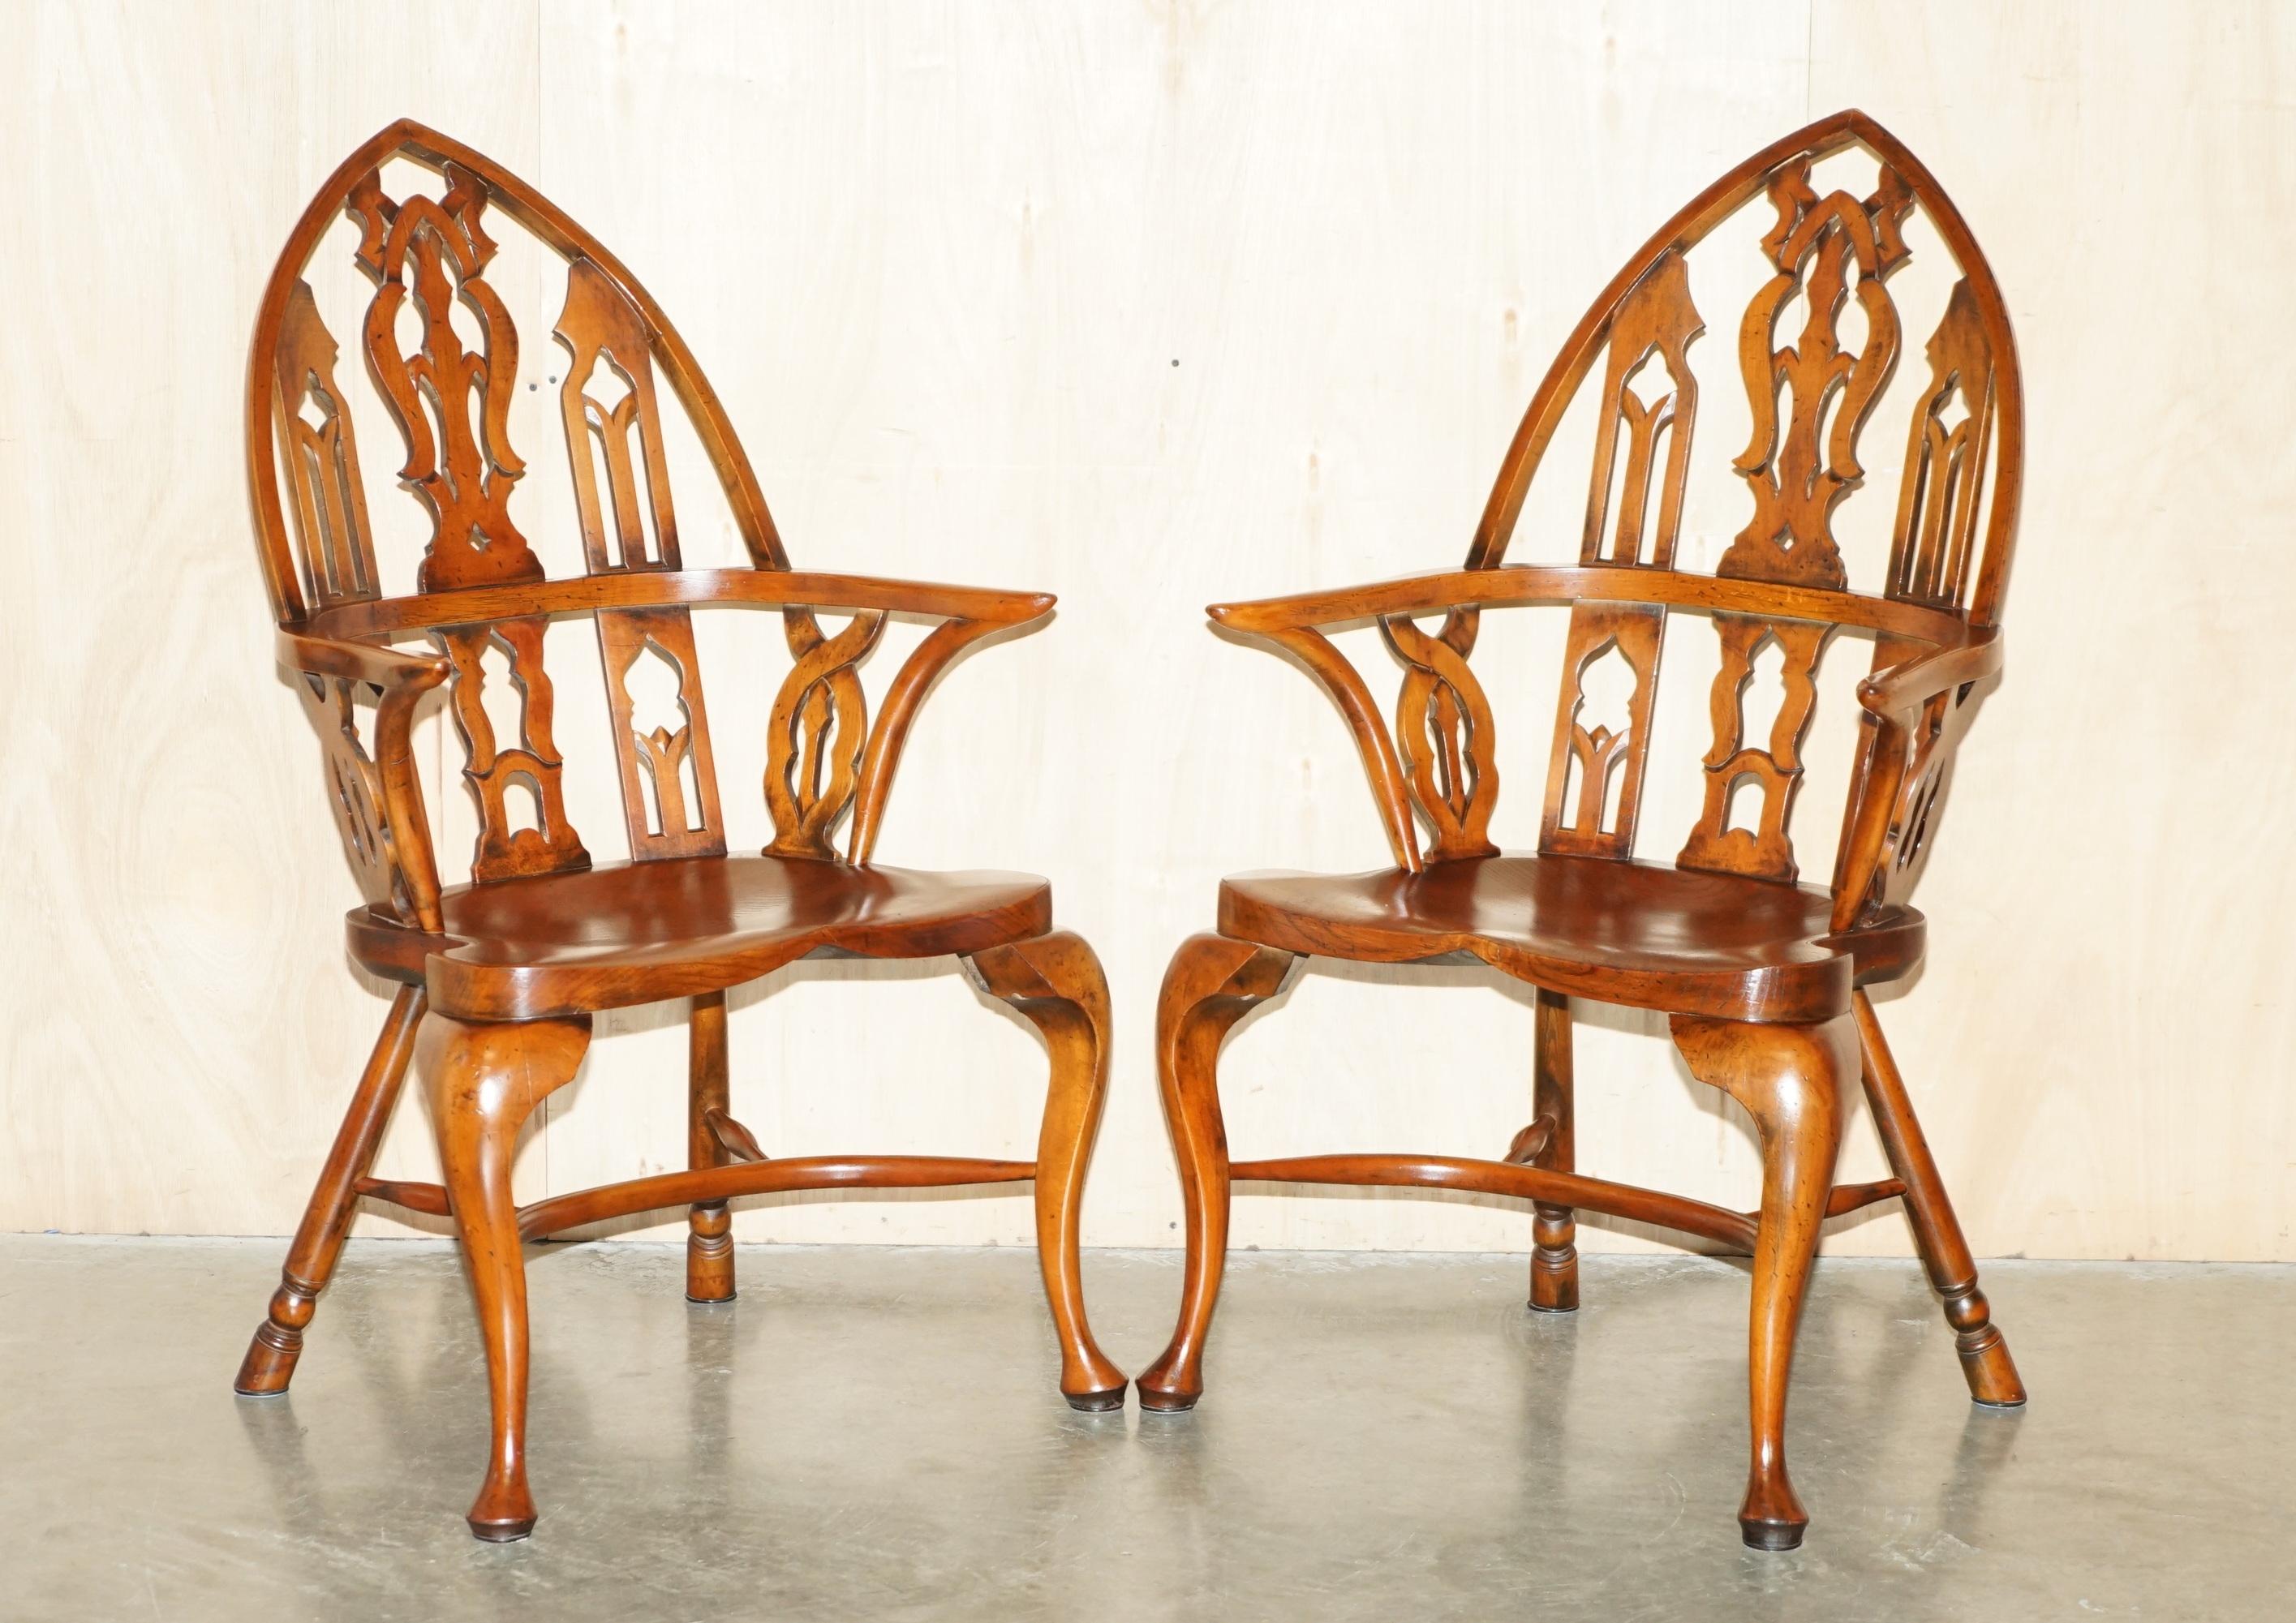 Royal House Antiques

Royal House Antiques is delighted to offer for sale this lovely suite of four Burr Yew & Elm circa 1940's Gothic Steeple back Windsor armchairs 

Please note the delivery fee listed is just a guide, it covers within the M25